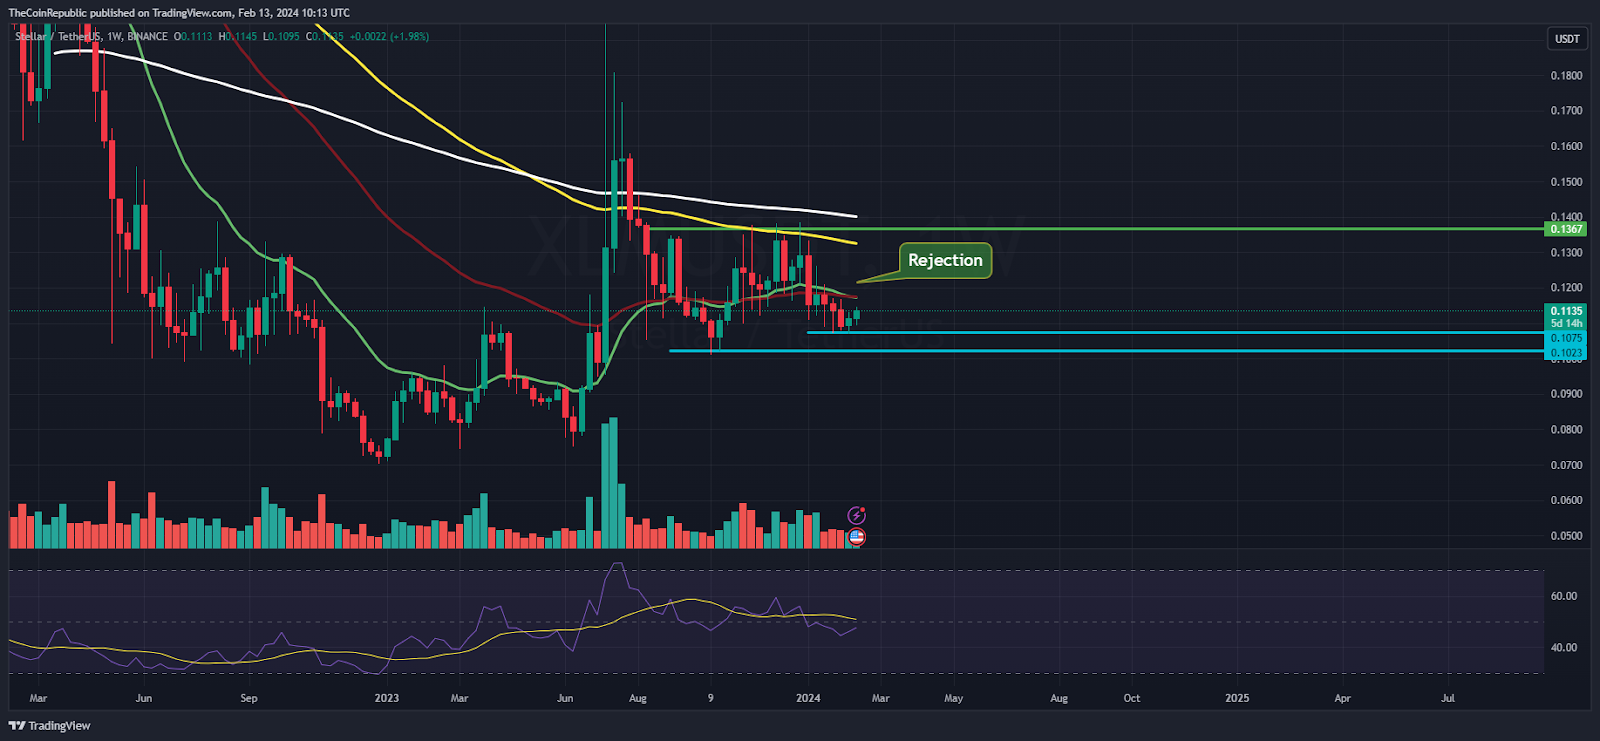 XLM Price Prediction: Is XLM Ready for a Rebound to $0.1200?